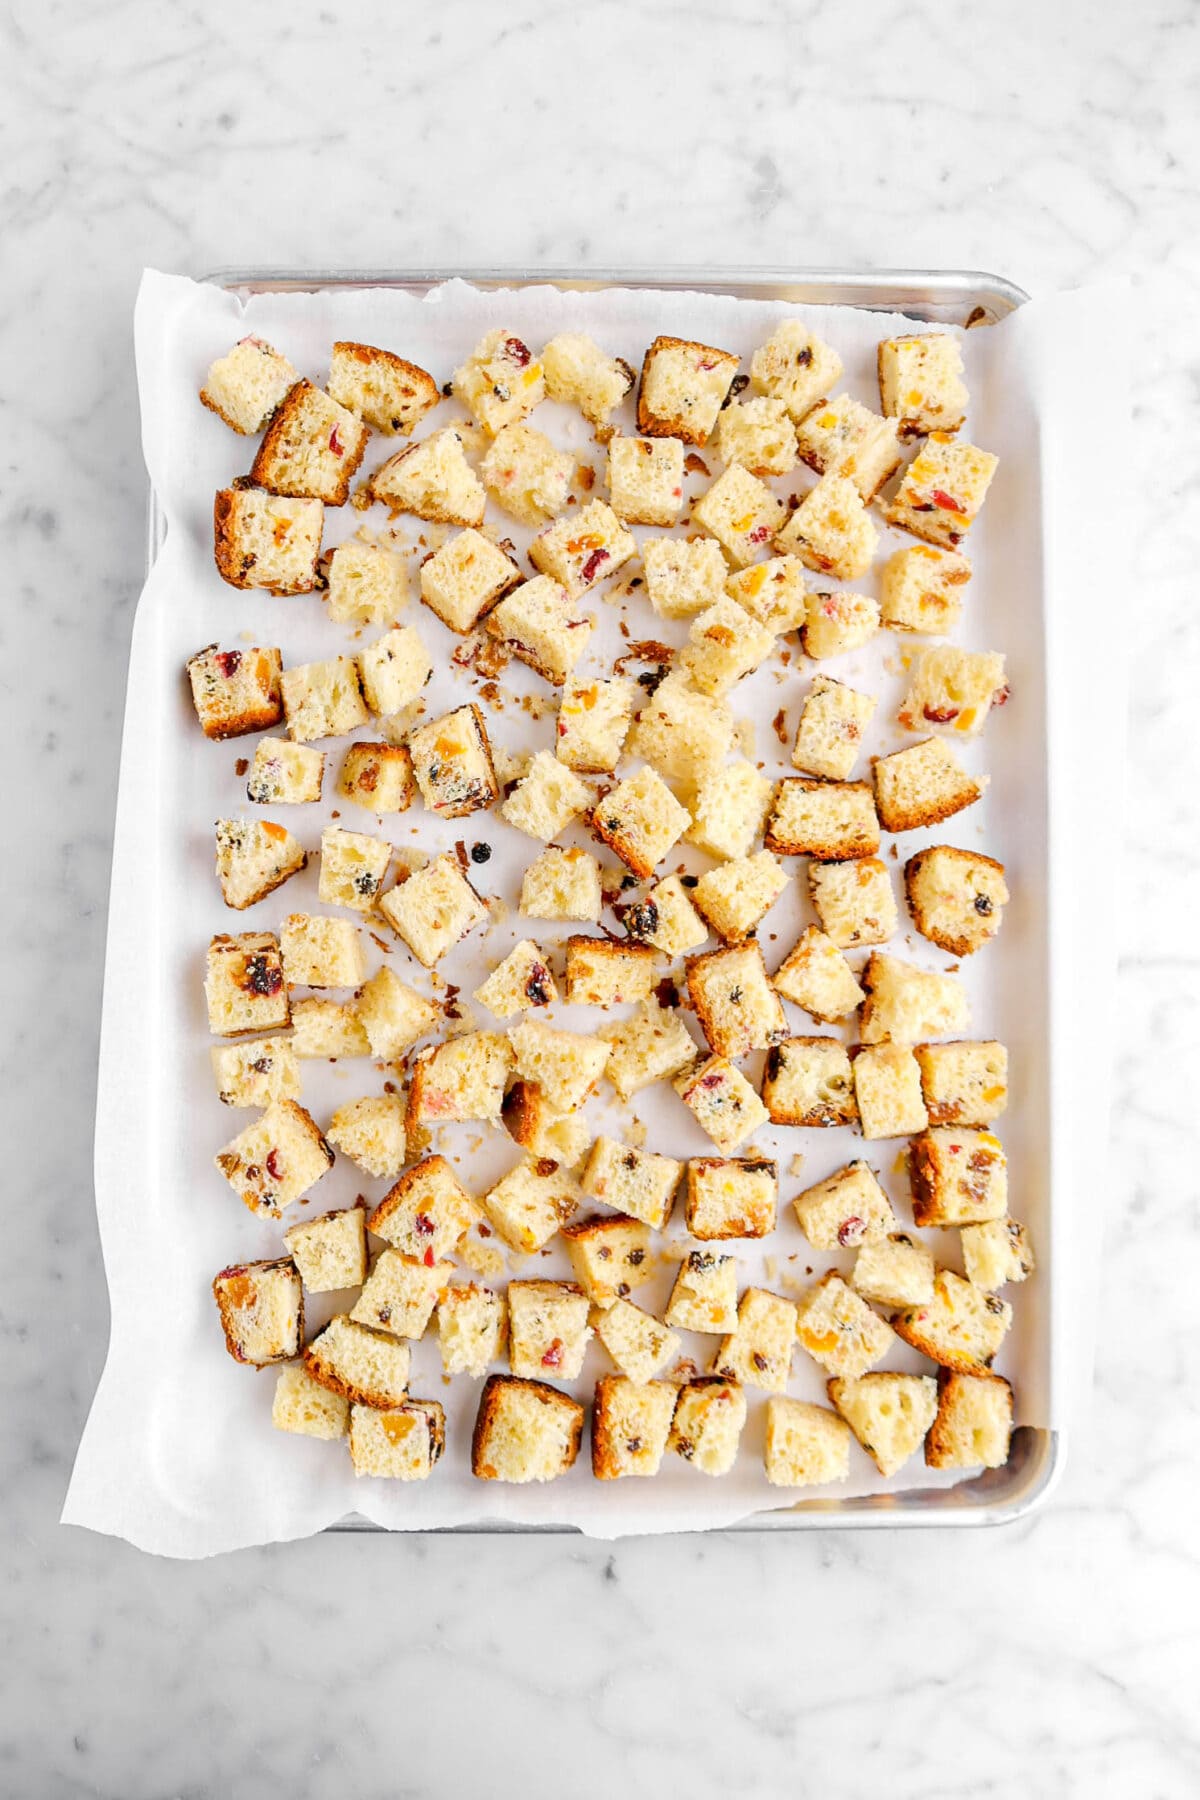 cubed panettone on lined sheet pan.